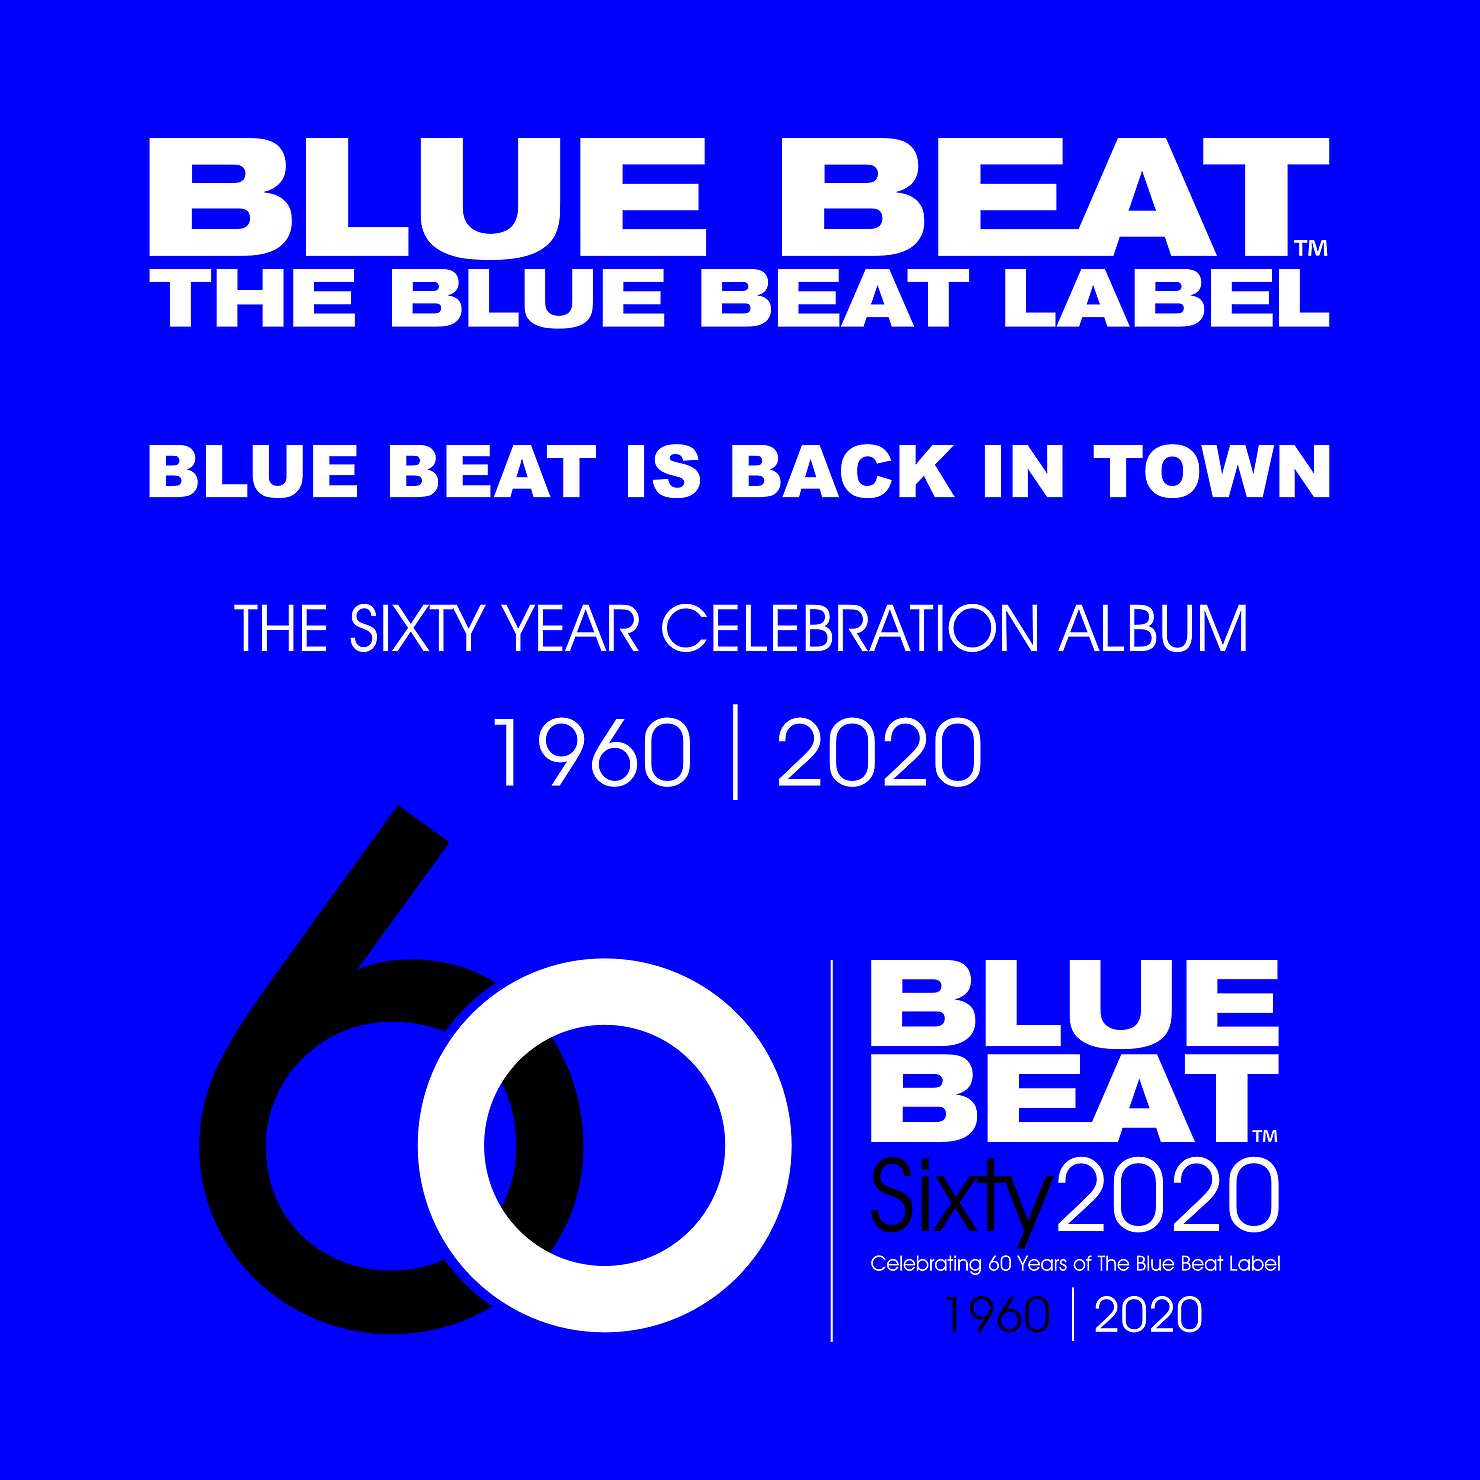 The Blue Beat Label